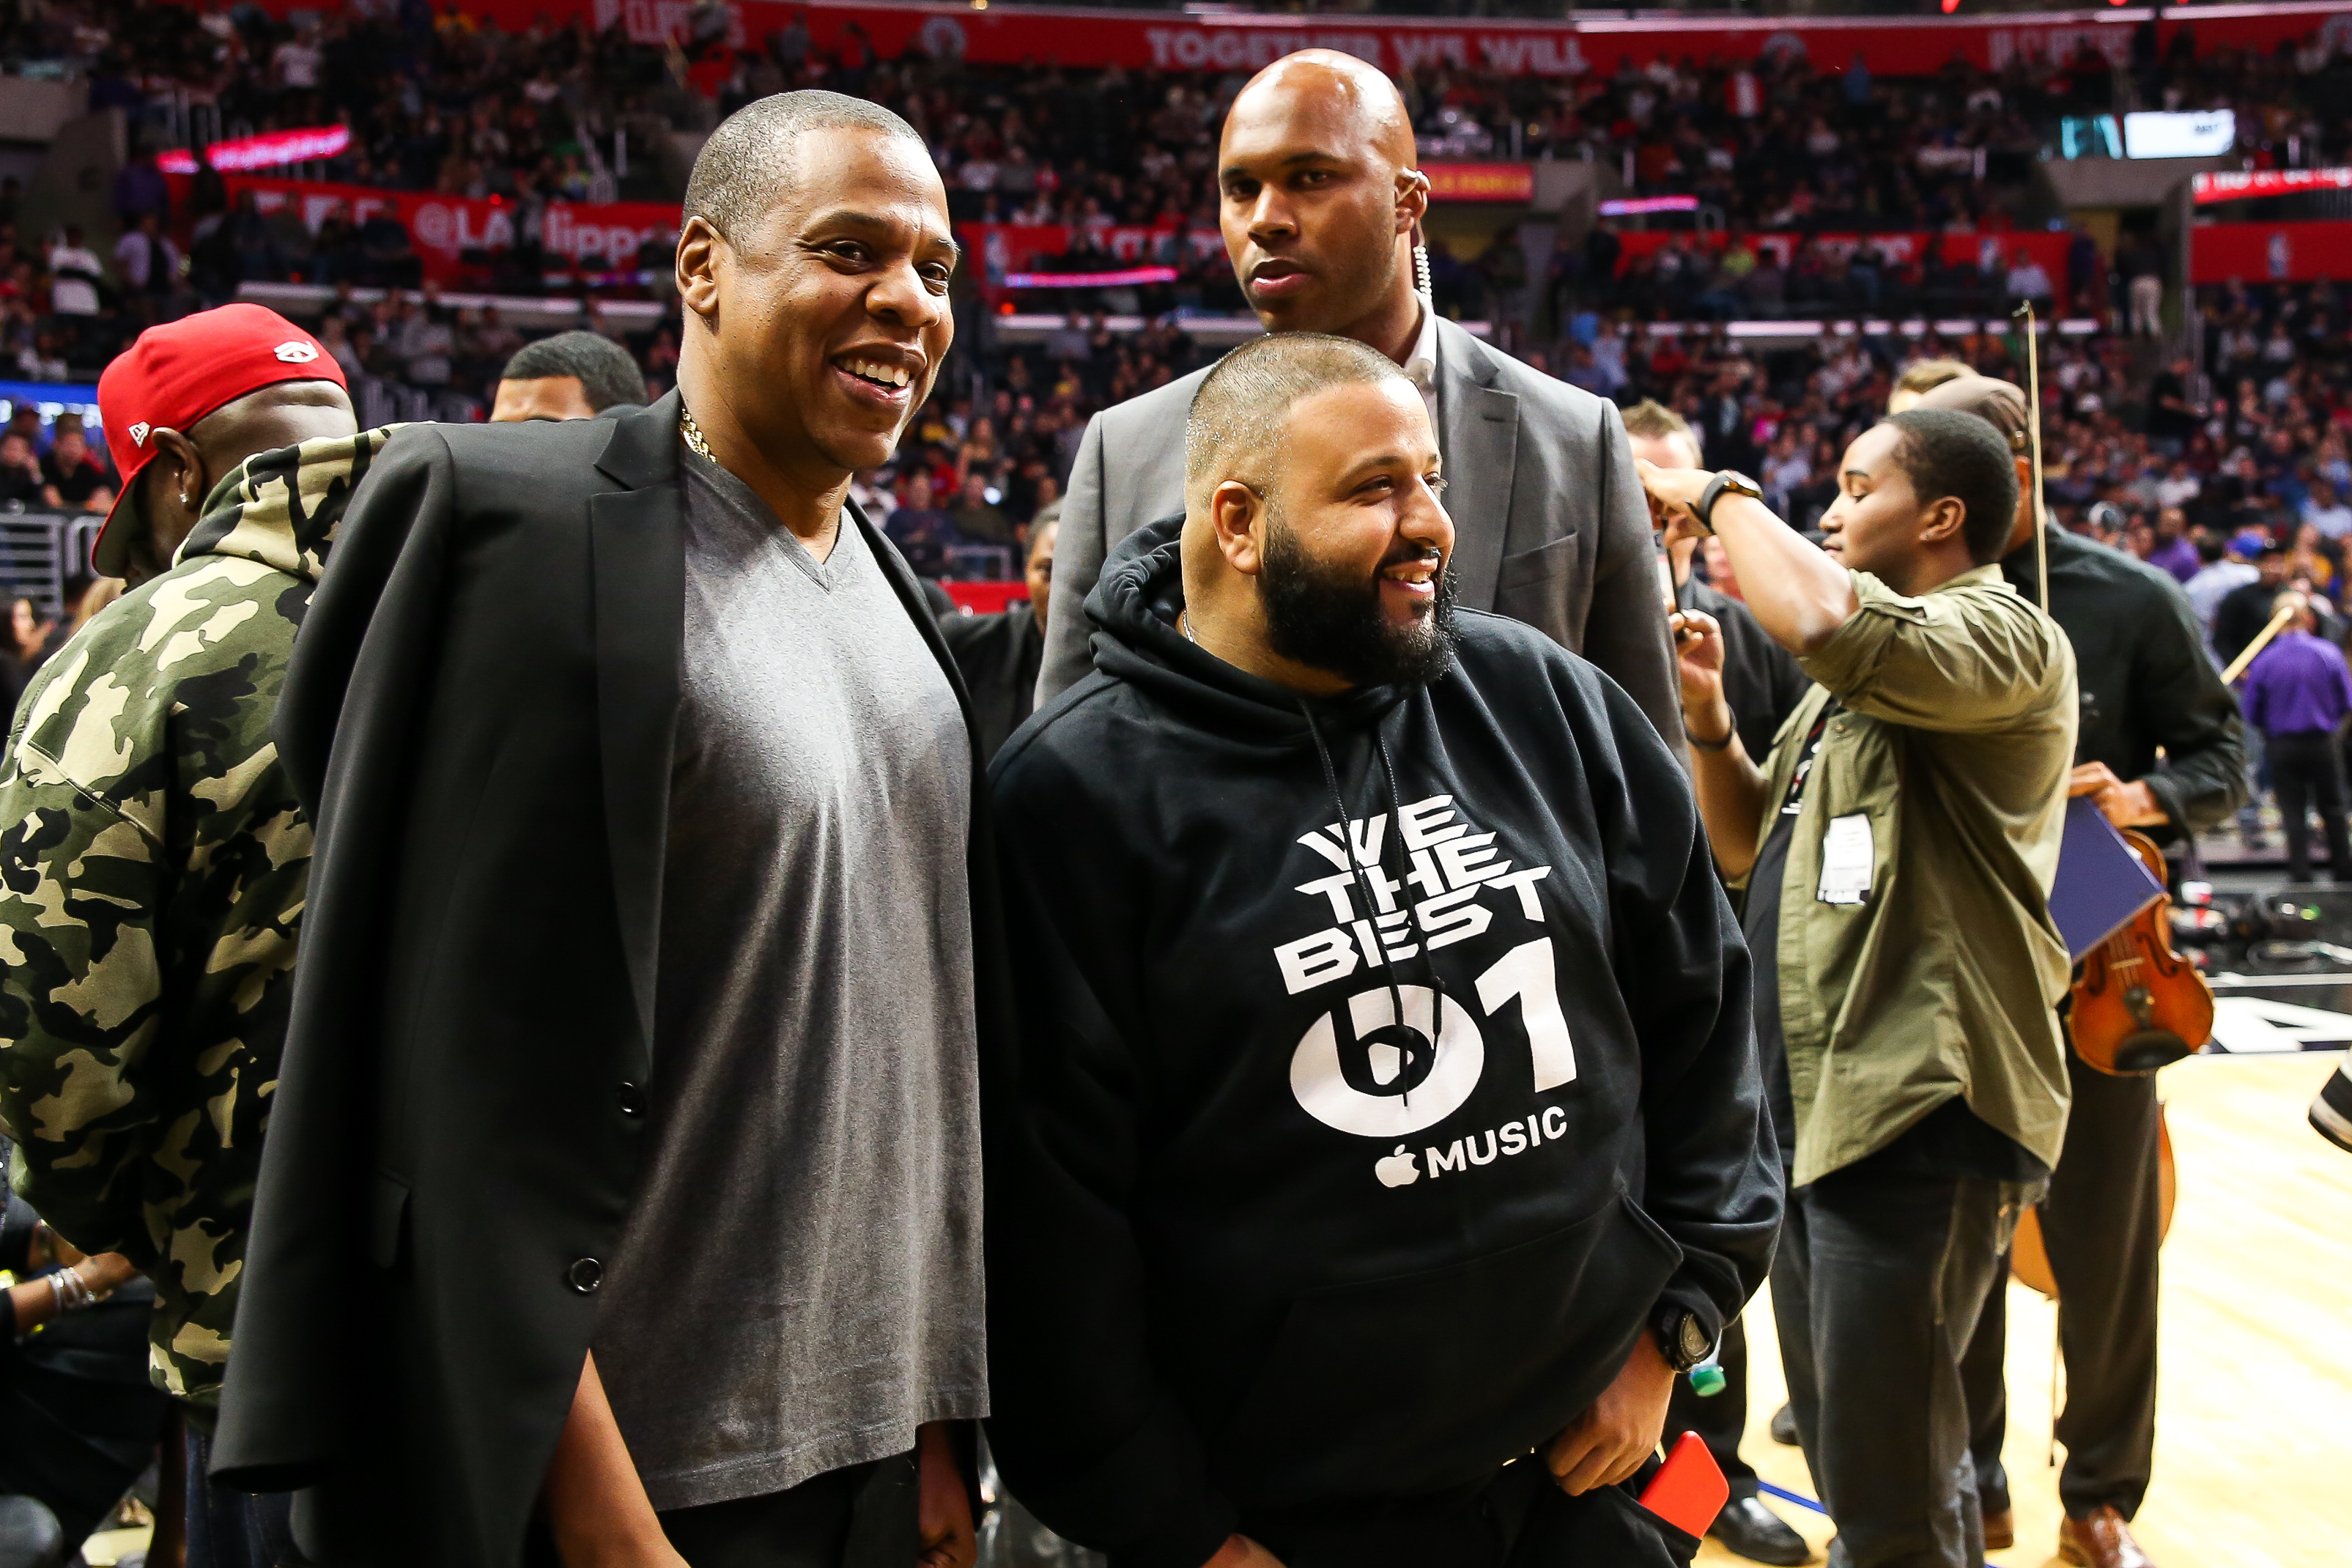 Beyonce and Jay Z attend the LA Clippers vs. Warriors game at Staples Center in Los Angeles Pictured: Jay Z, DJ Khaled Ref: SPL1207117 200216 Picture by: Emmerson / Splash Splash News and Pictures Los Angeles: 310-821-2666 New York: 212-619-2666 London: 870-934-2666 photodesk@splashnews.com 